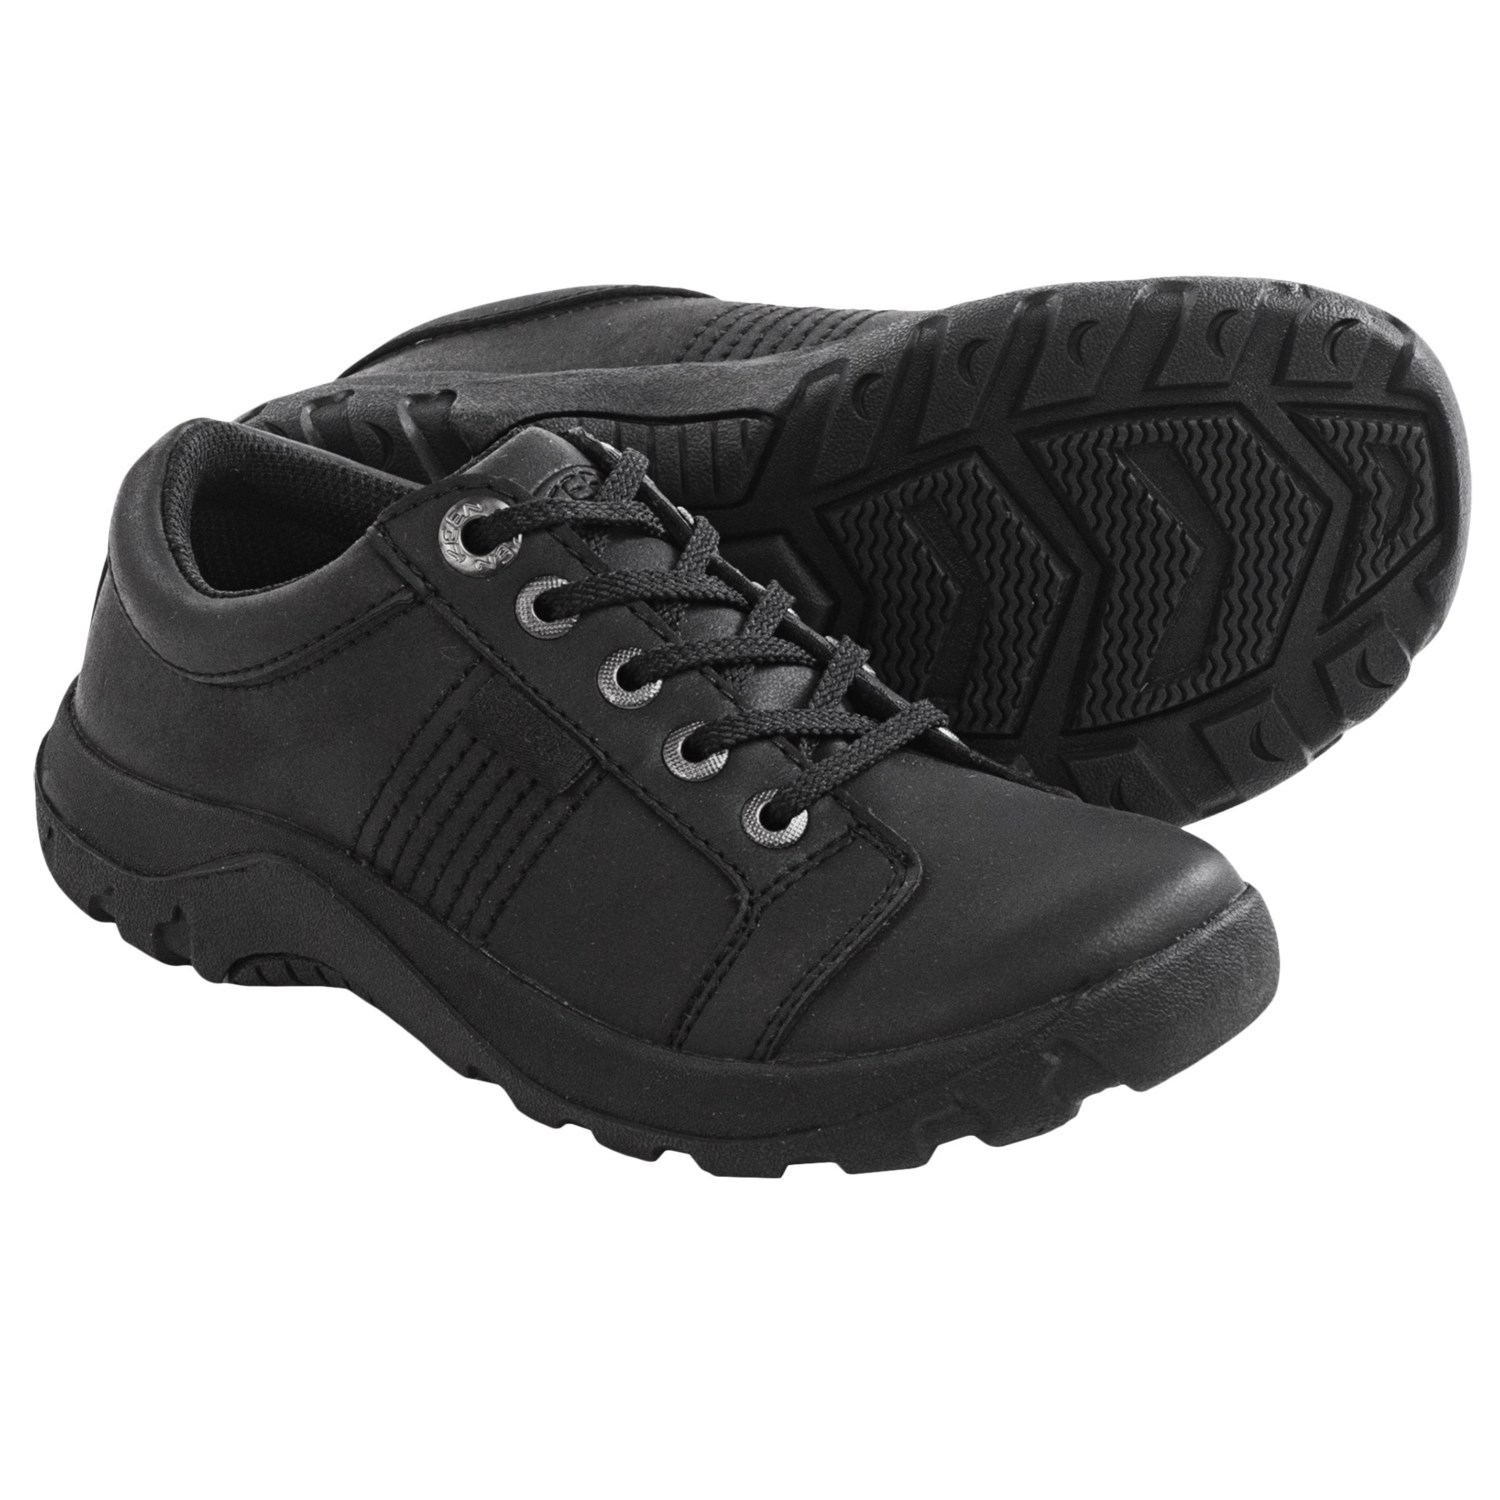 Keen Austin II Shoes (For Big Boys) - Save 45%